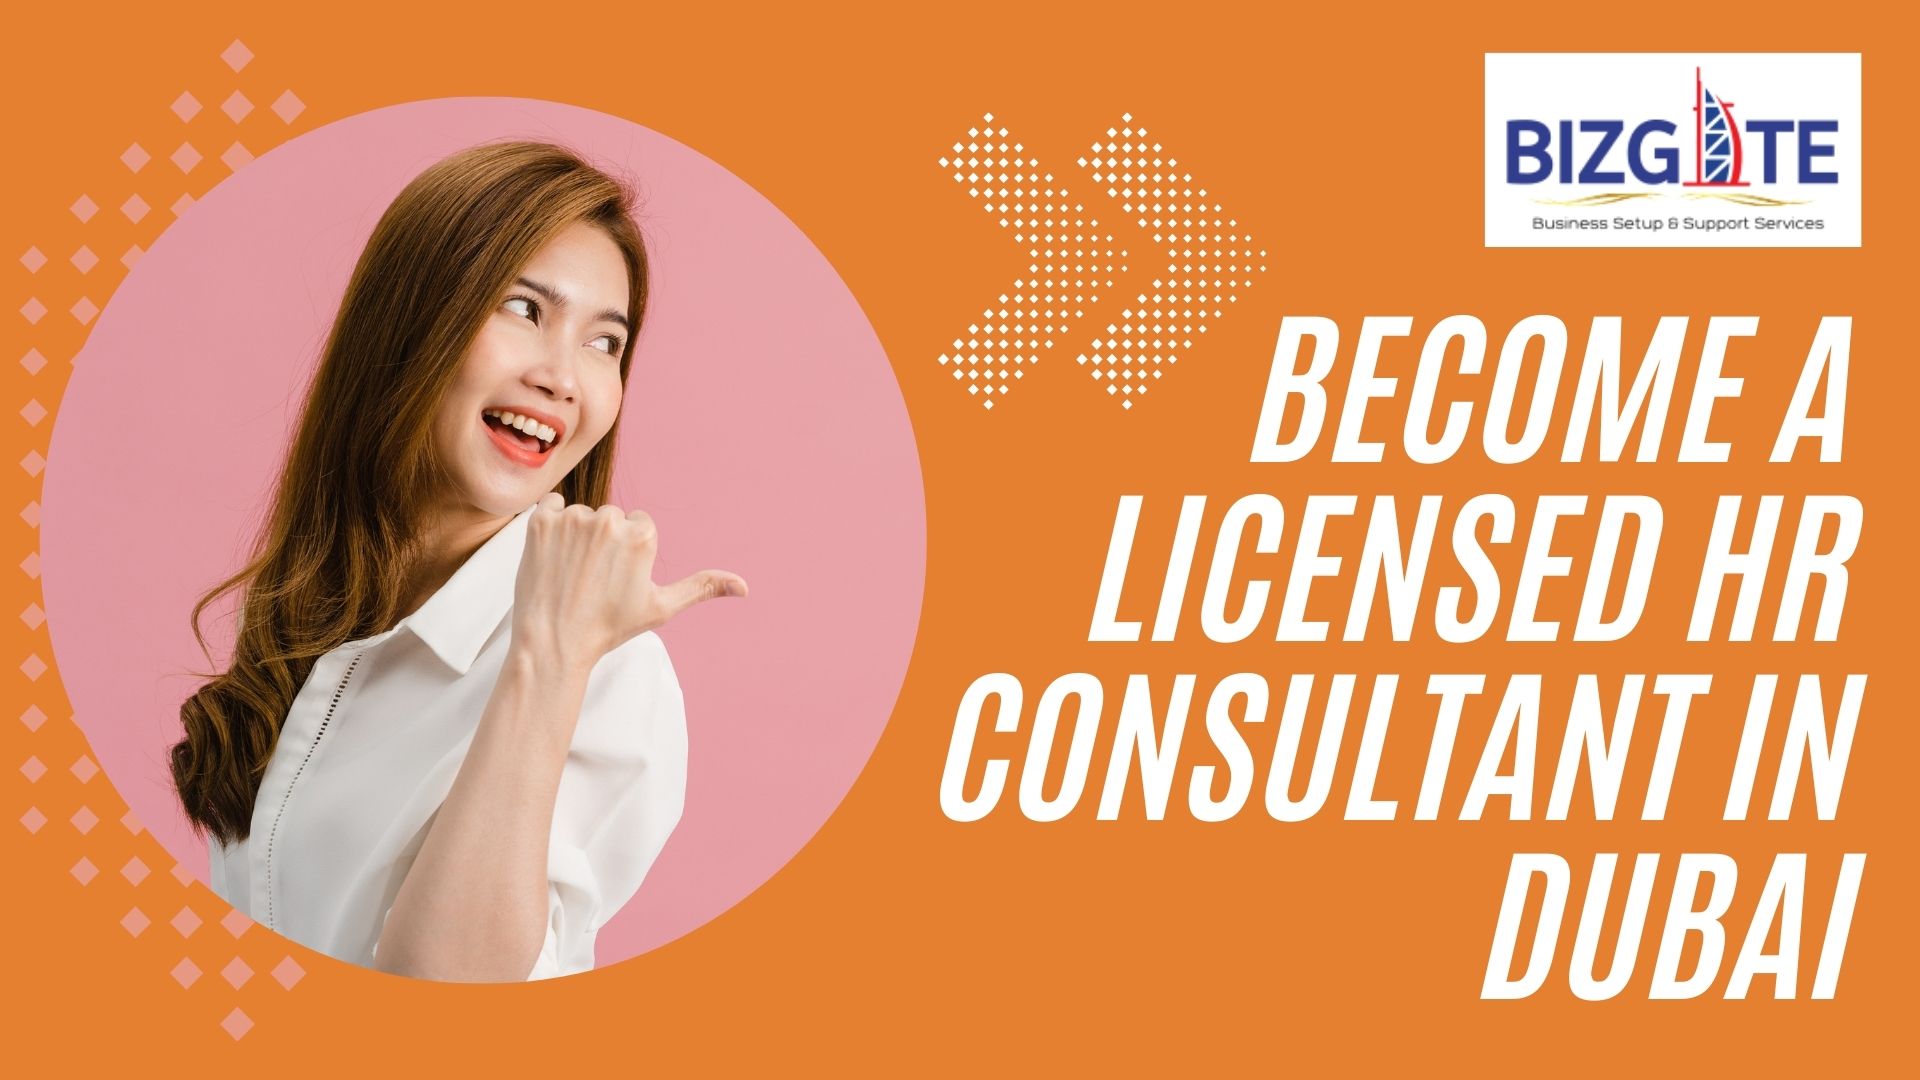 You are currently viewing How To Get An HR Consultancy License In Dubai? | Business Setup in Dubai